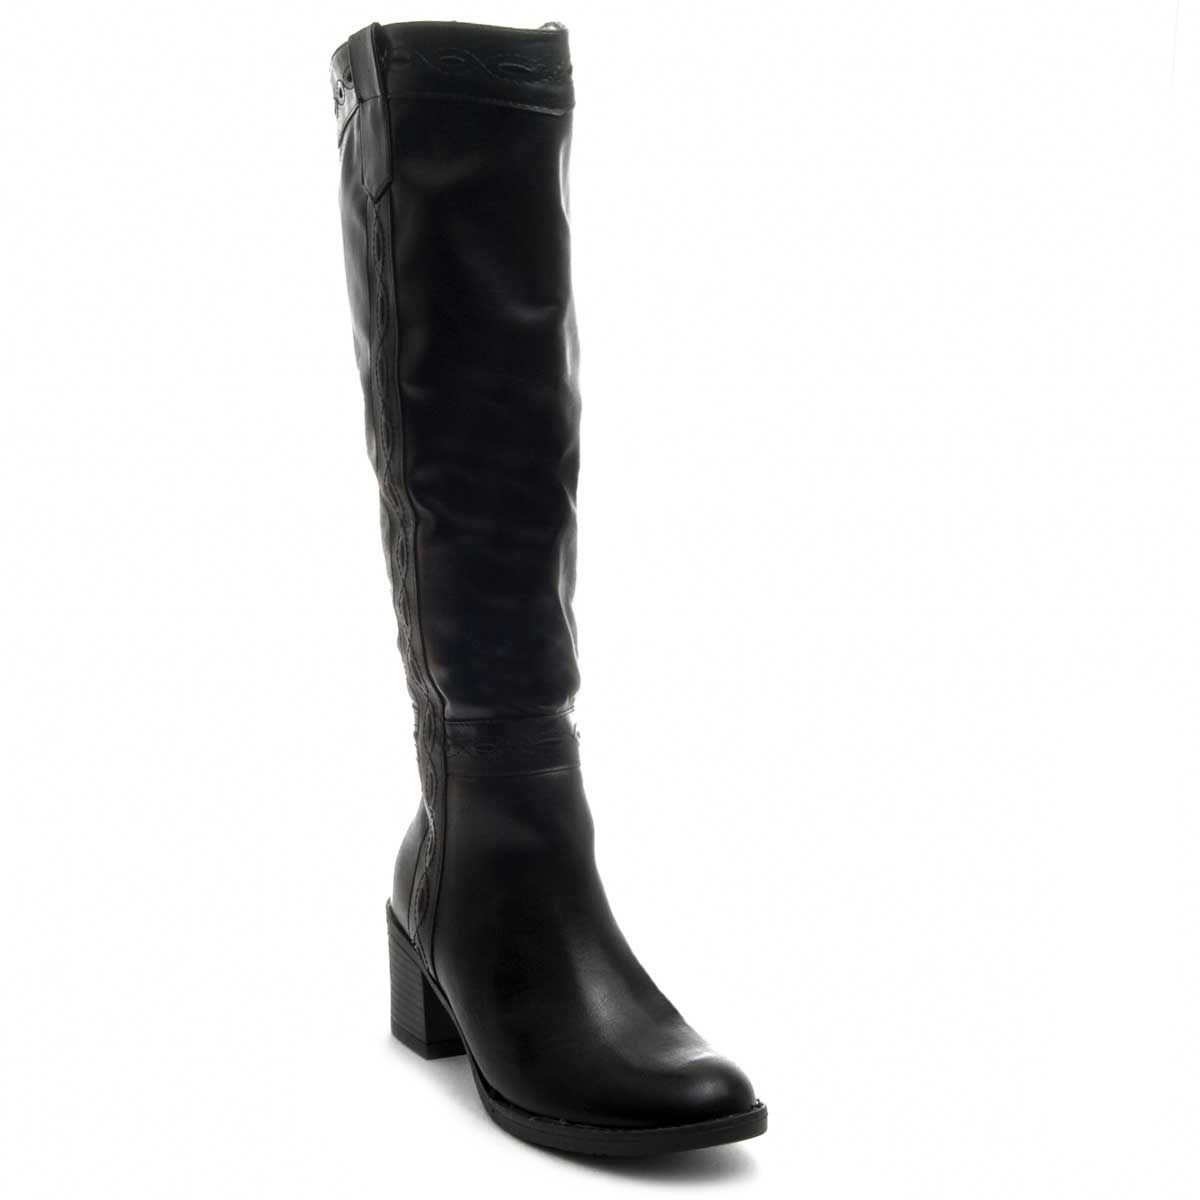 Capsula Kylie collection. High Comfortable Woman Boot. Comfortable wide heel. Material adaptable to the leg. Zip closure on the side. Previous and later buttress. Anti-slip rubber floor. Inner textile material. Padded template. Sewing doubly reinforced. Comfortable Hormo. Easy to clean material.